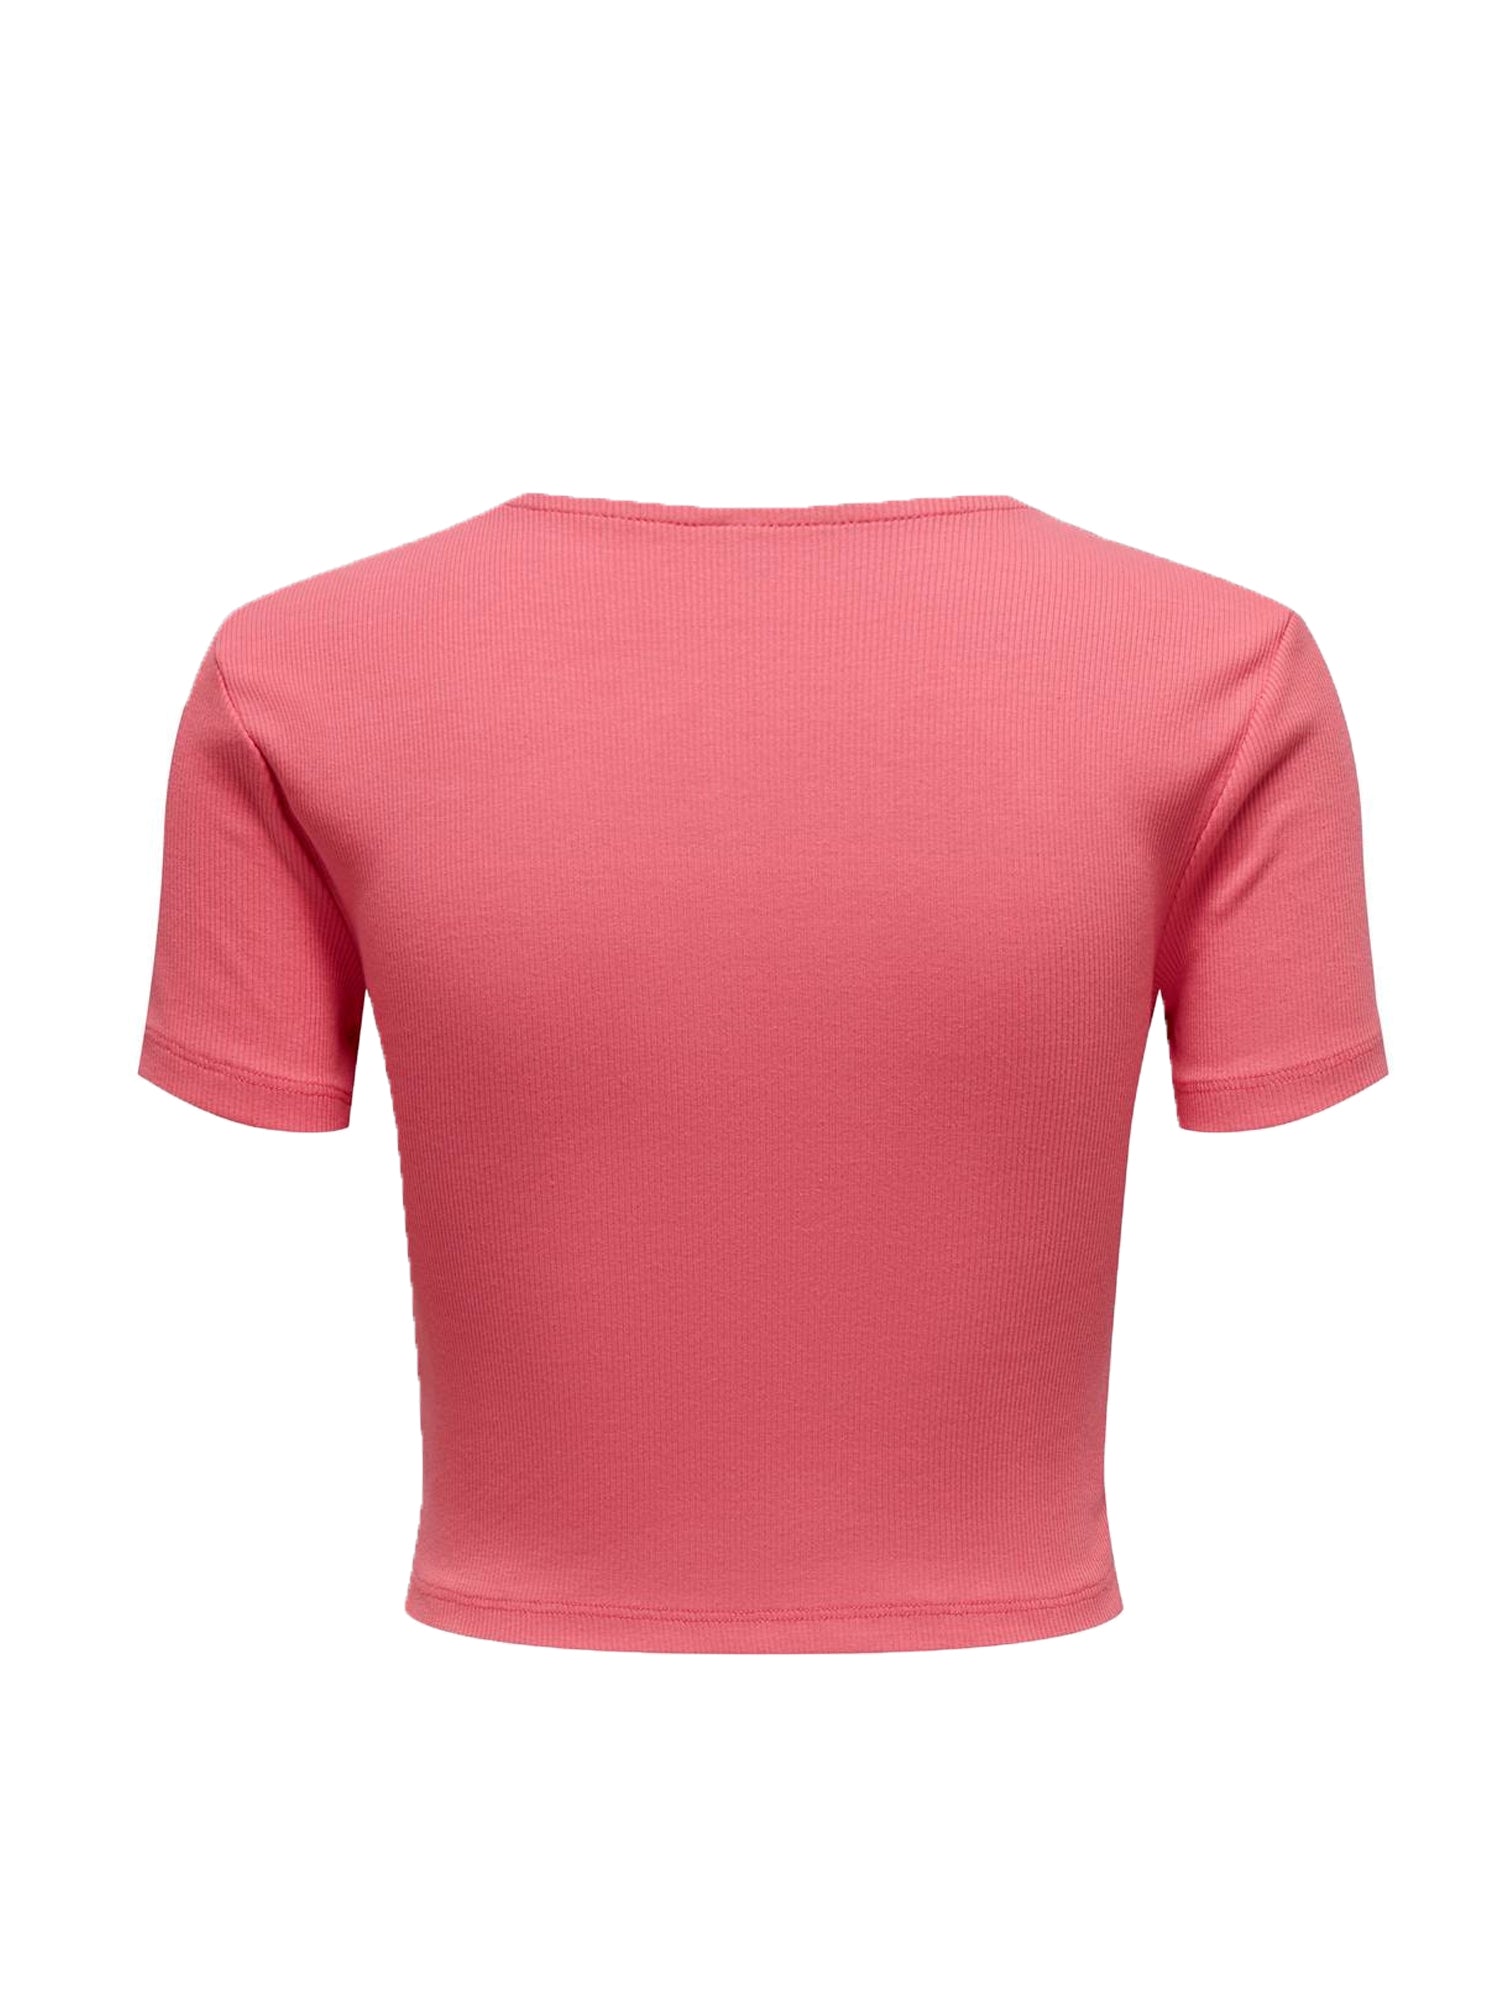 ONLY T-SHIRT FREJA CROPPED ROSA CORALLO